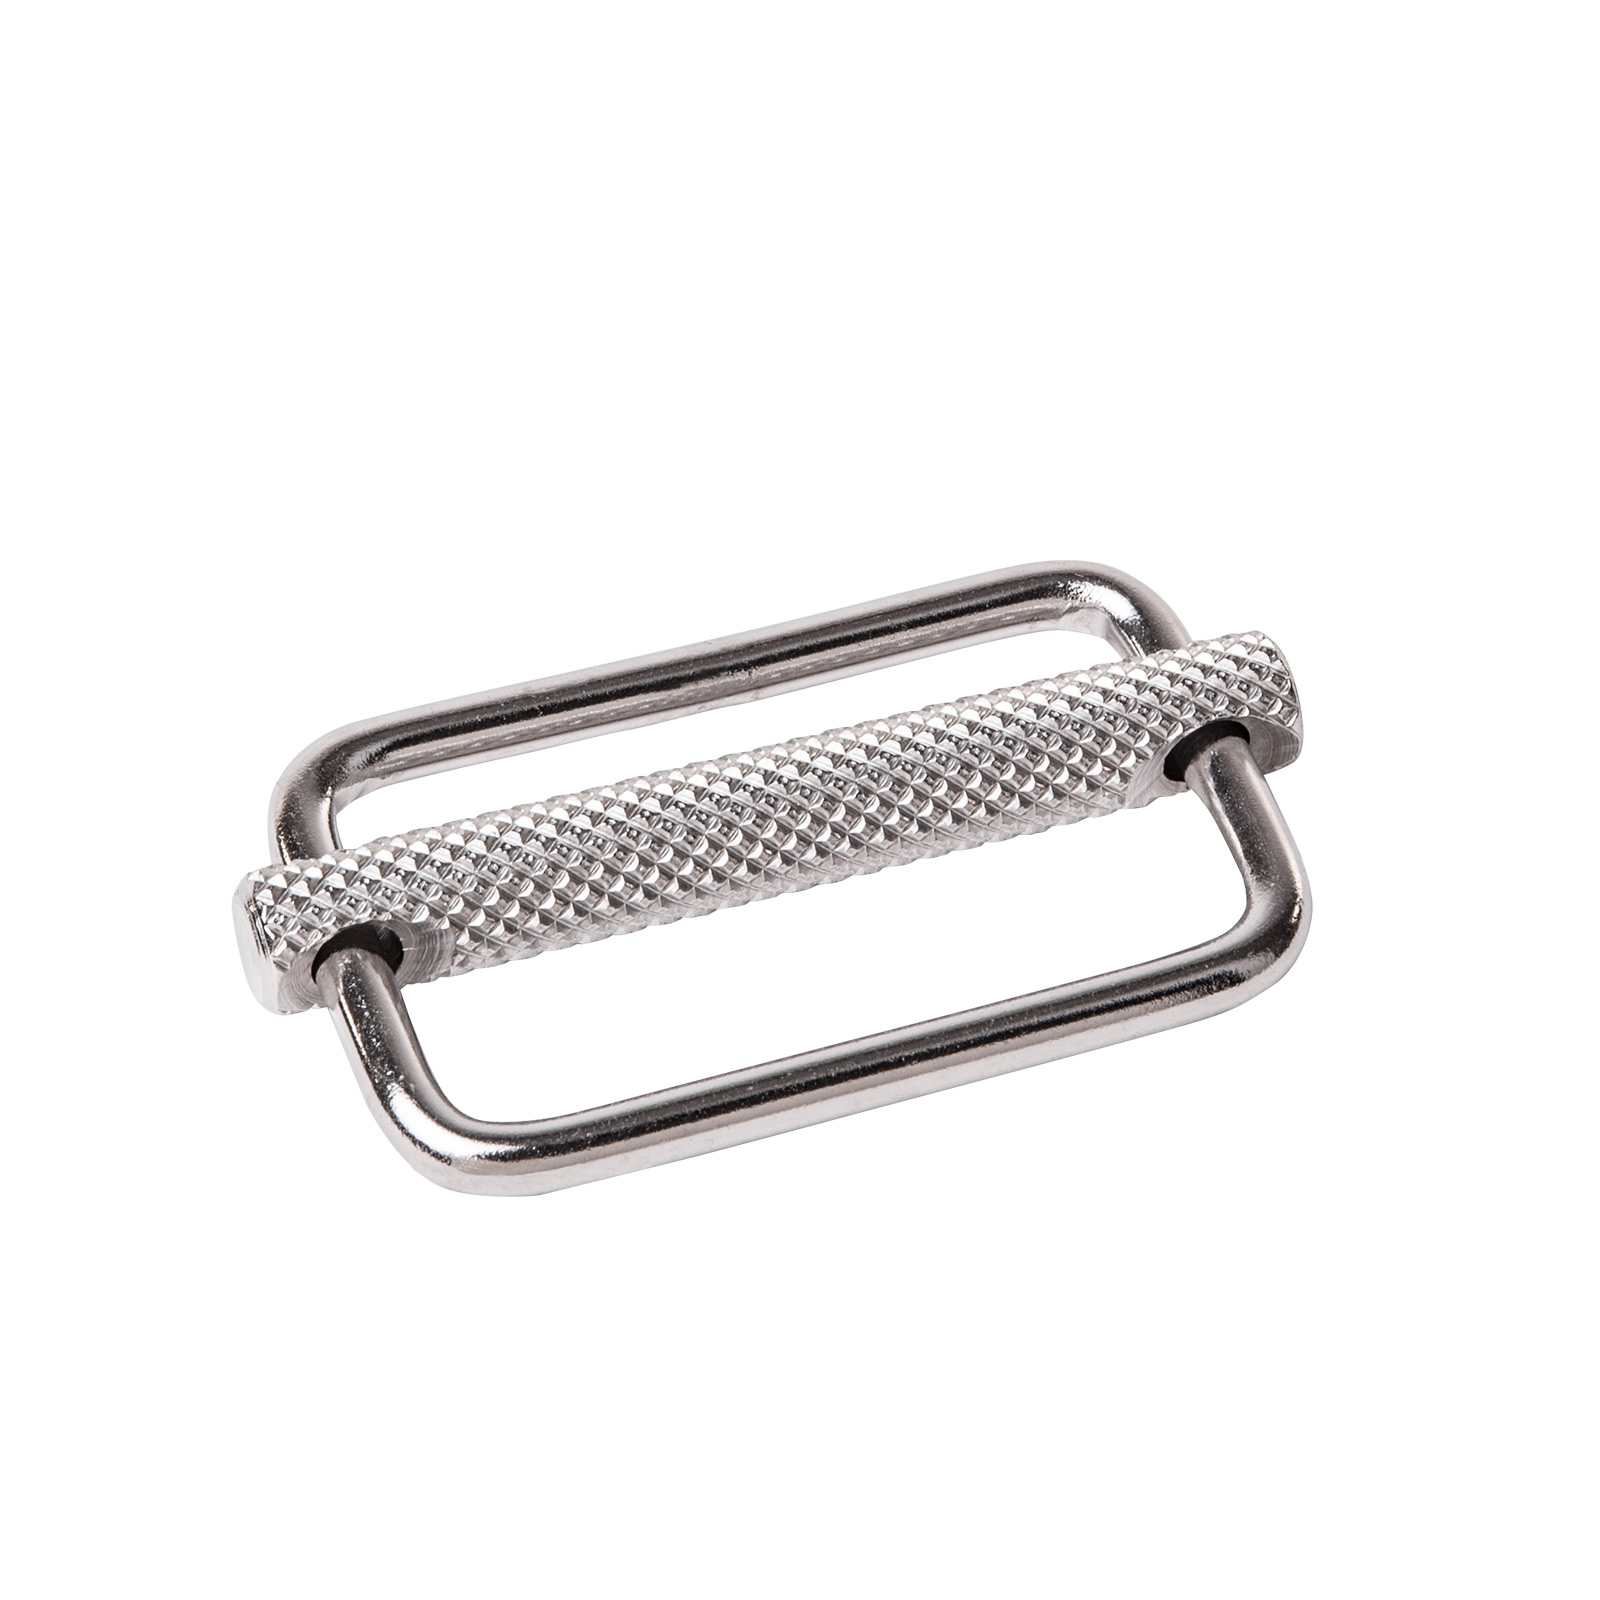 Stainless Steel Webbing Keeper With Sliding-Bar